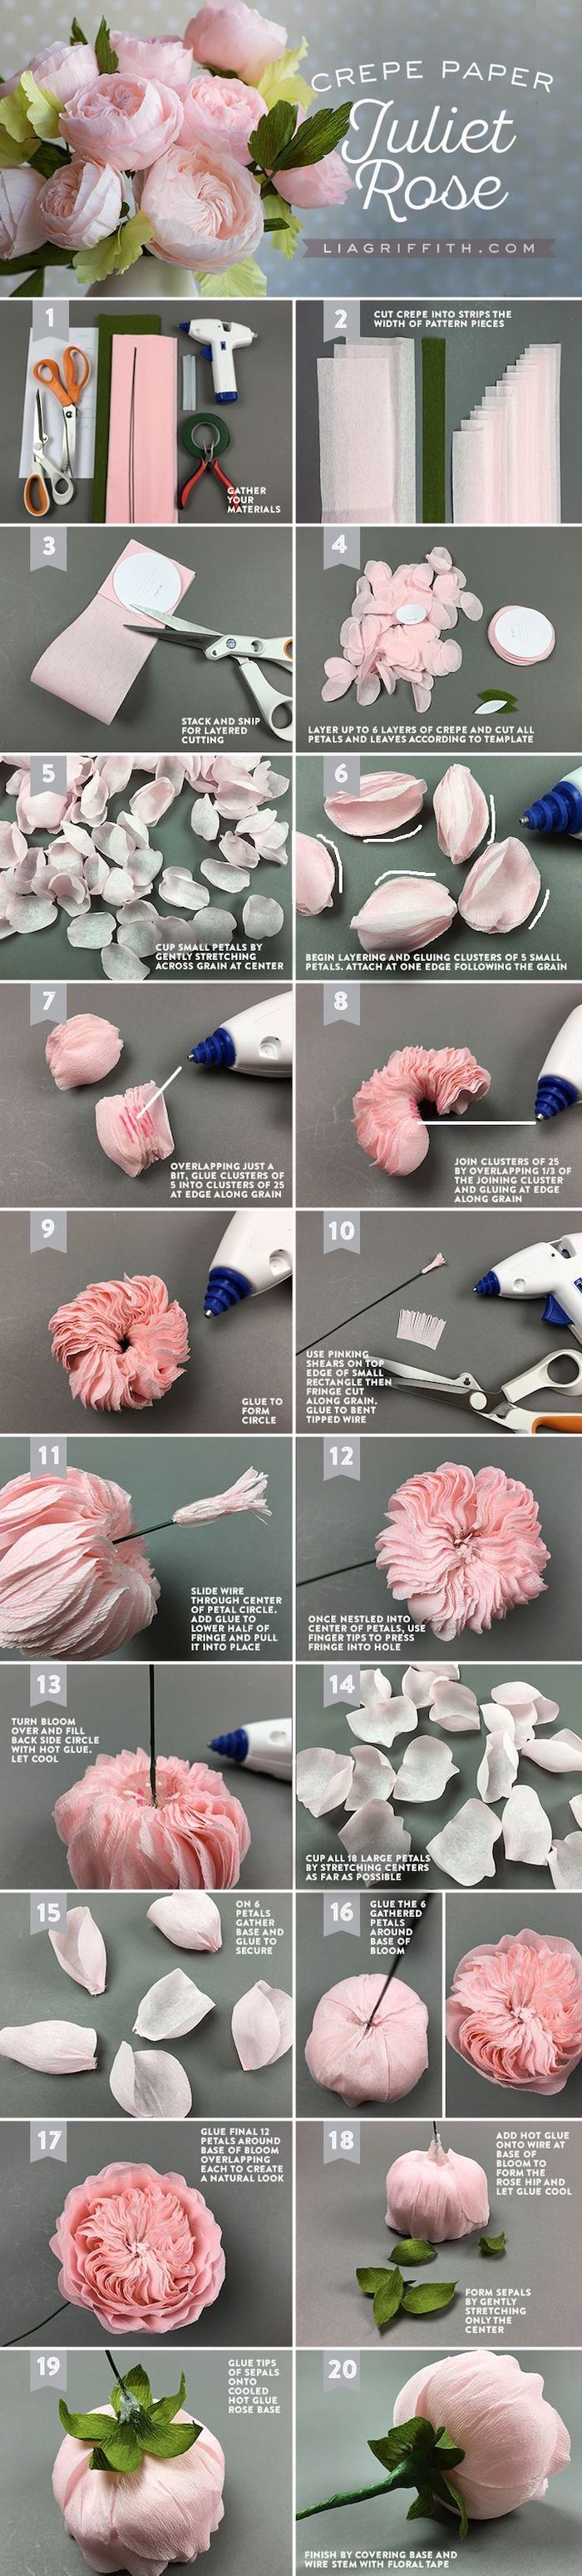 how to make a juliet rose out of crepe paper, crepe paper flowers, photo collage of step by step diy tutorial